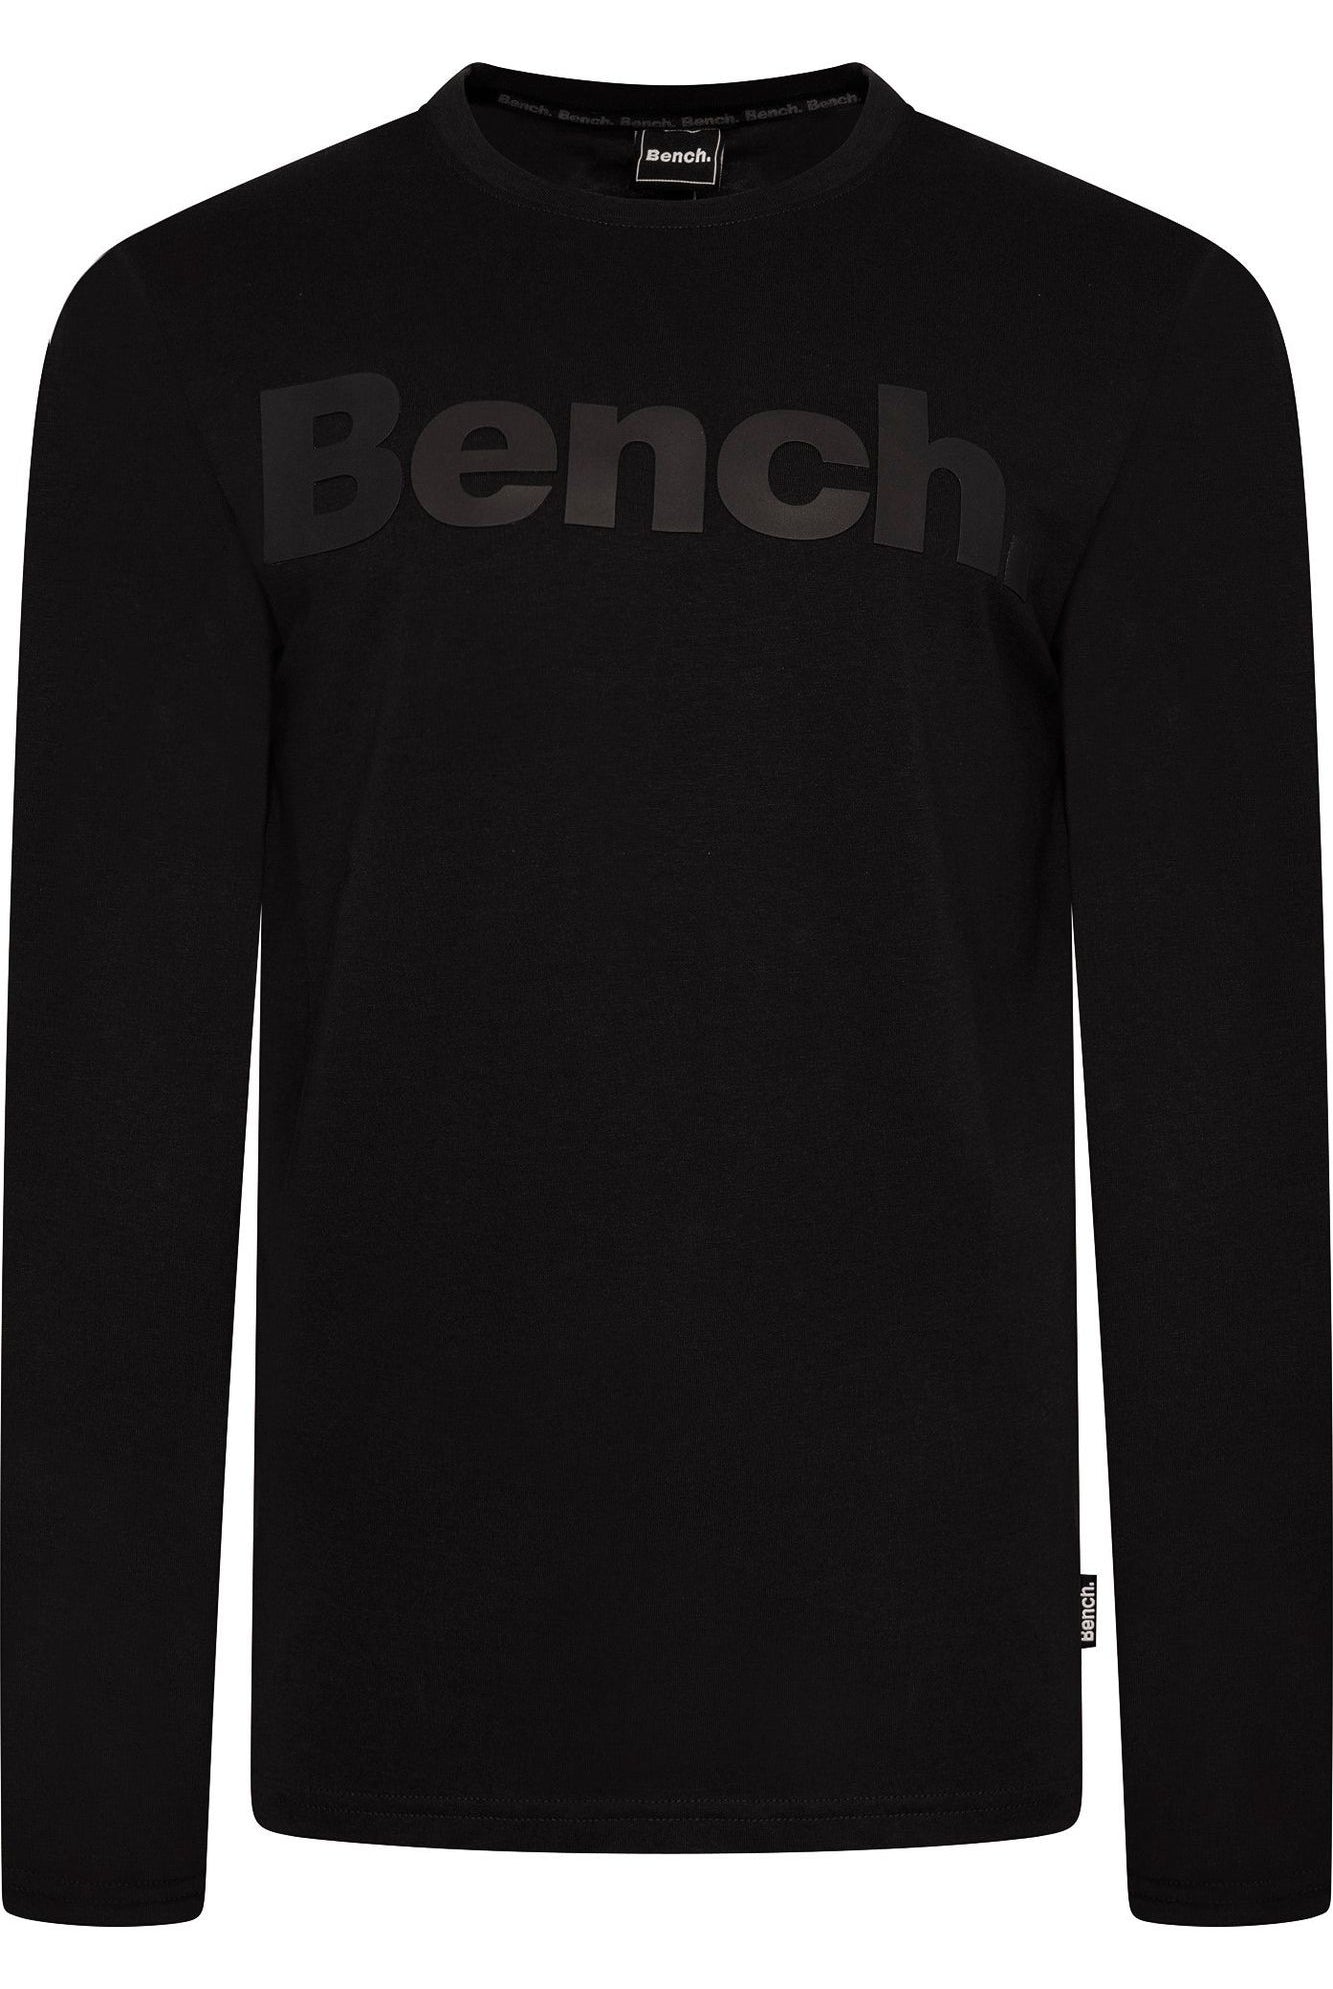 Bench: Value Multipack Tees, Tracksuits & More for Men & Women